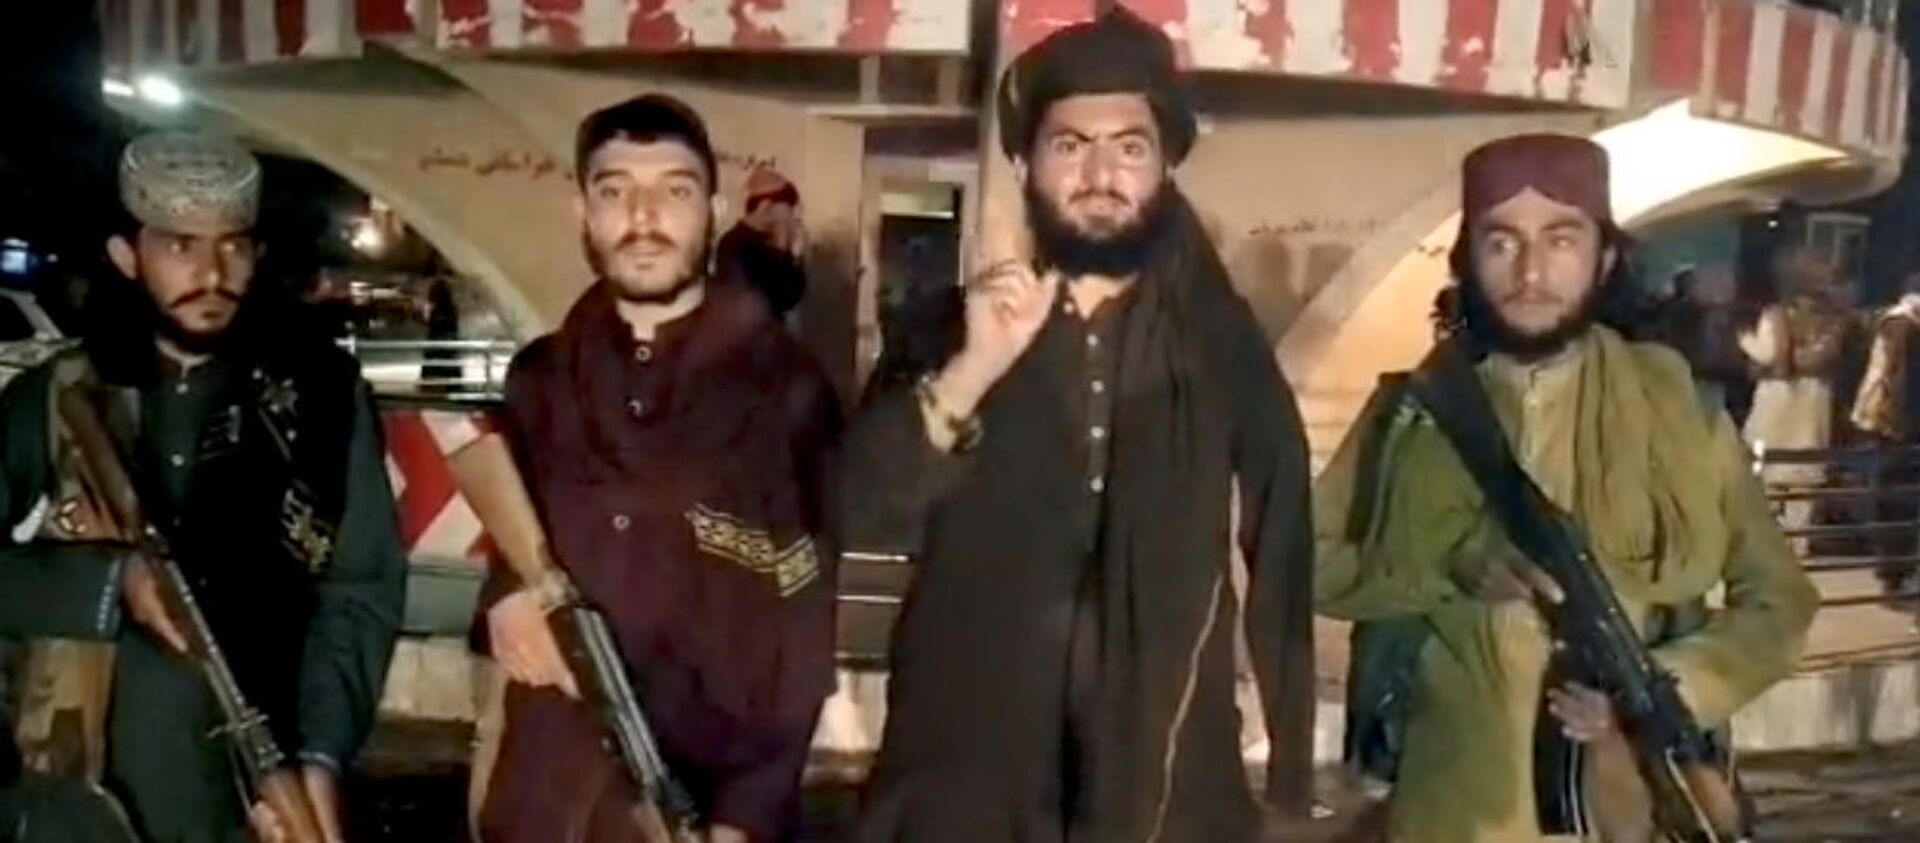 Taliban fighters record a message after seizing Pul-e- Khumri, capital of Baghlan province, Afghanistan, in this still image taken from a social media video, uploaded August 10, 2021 - Sputnik International, 1920, 12.08.2021